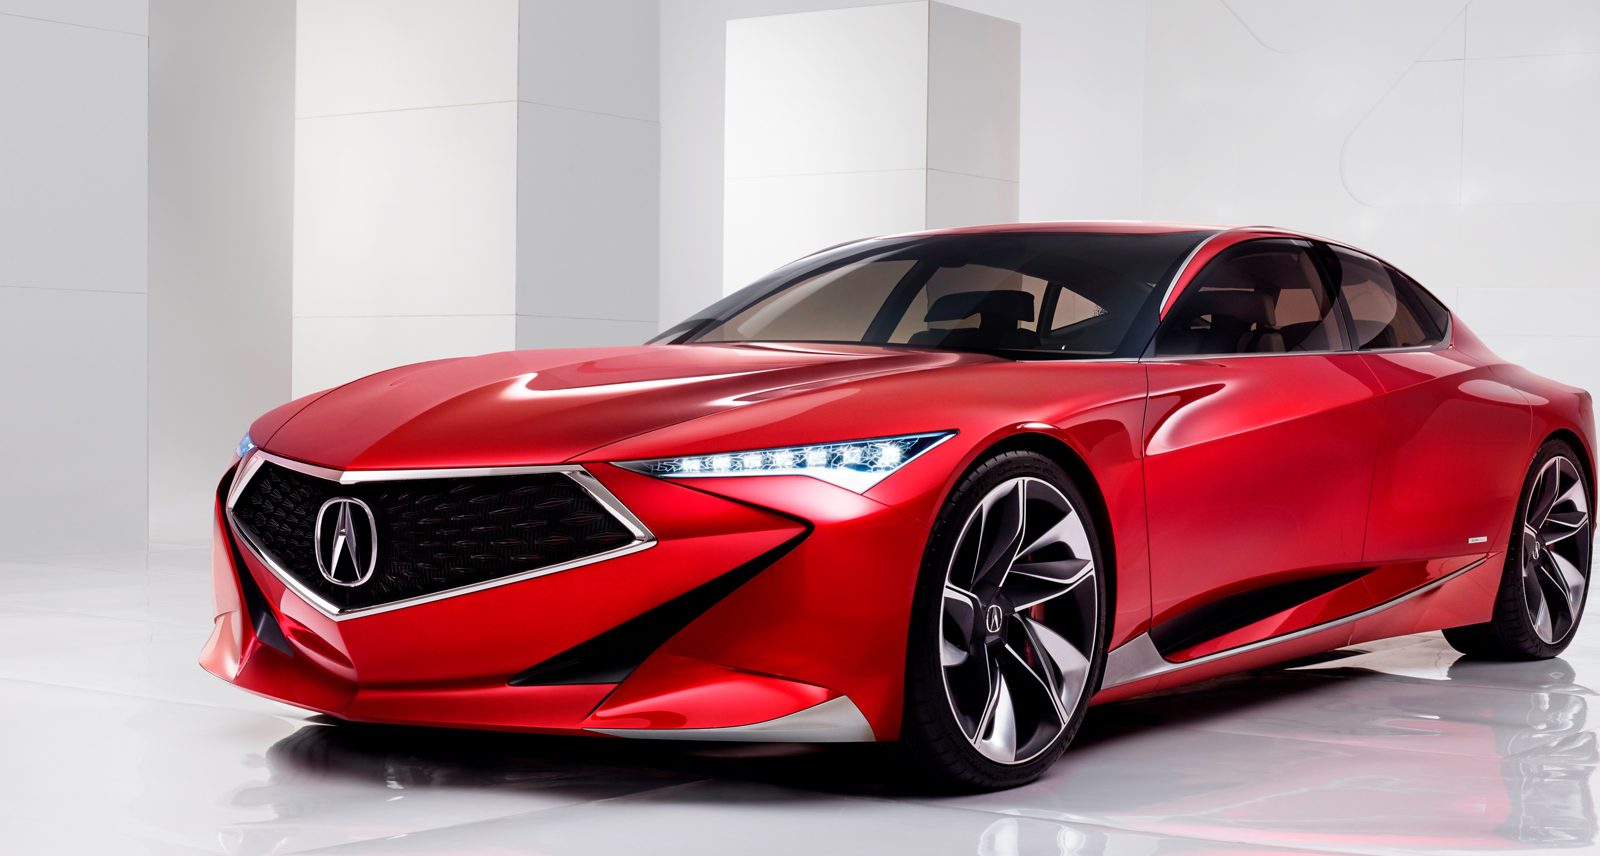 The Legend of Acura: How the Automaker Is Rediscovering Its Past In Order to Move Forward